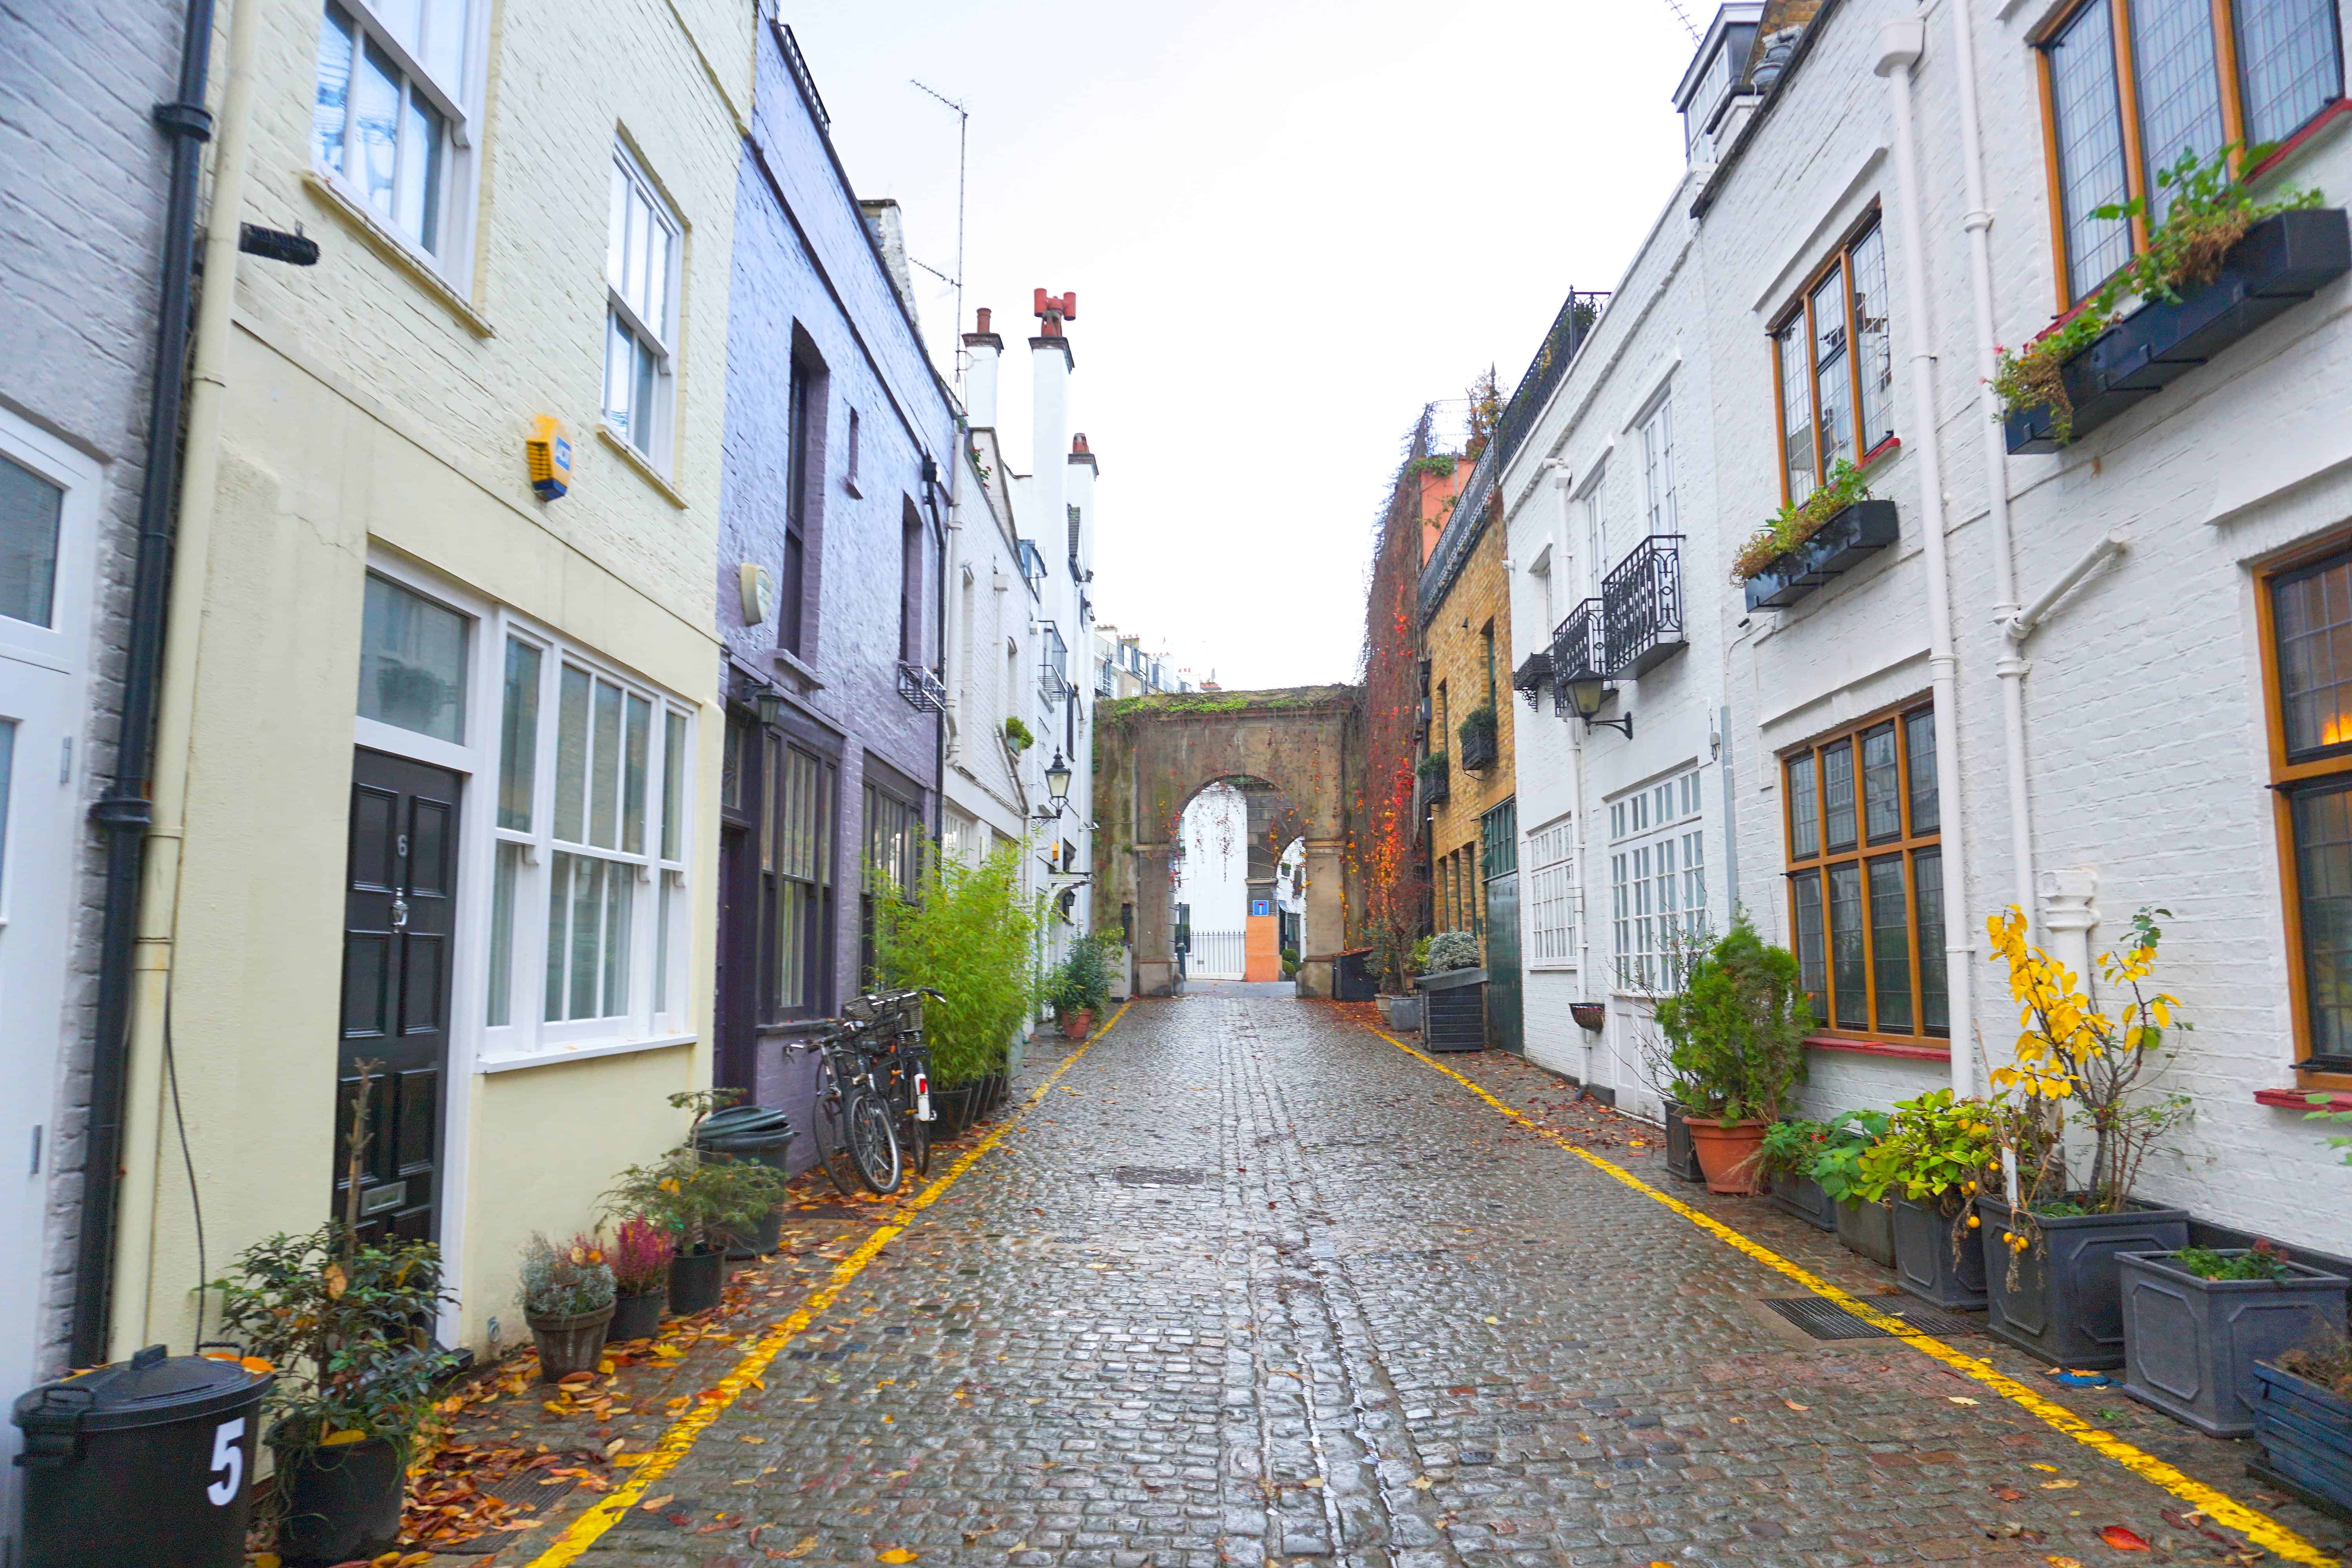 Kynance Mews Is one of the prettiest streets in London you must visit | london travel tips